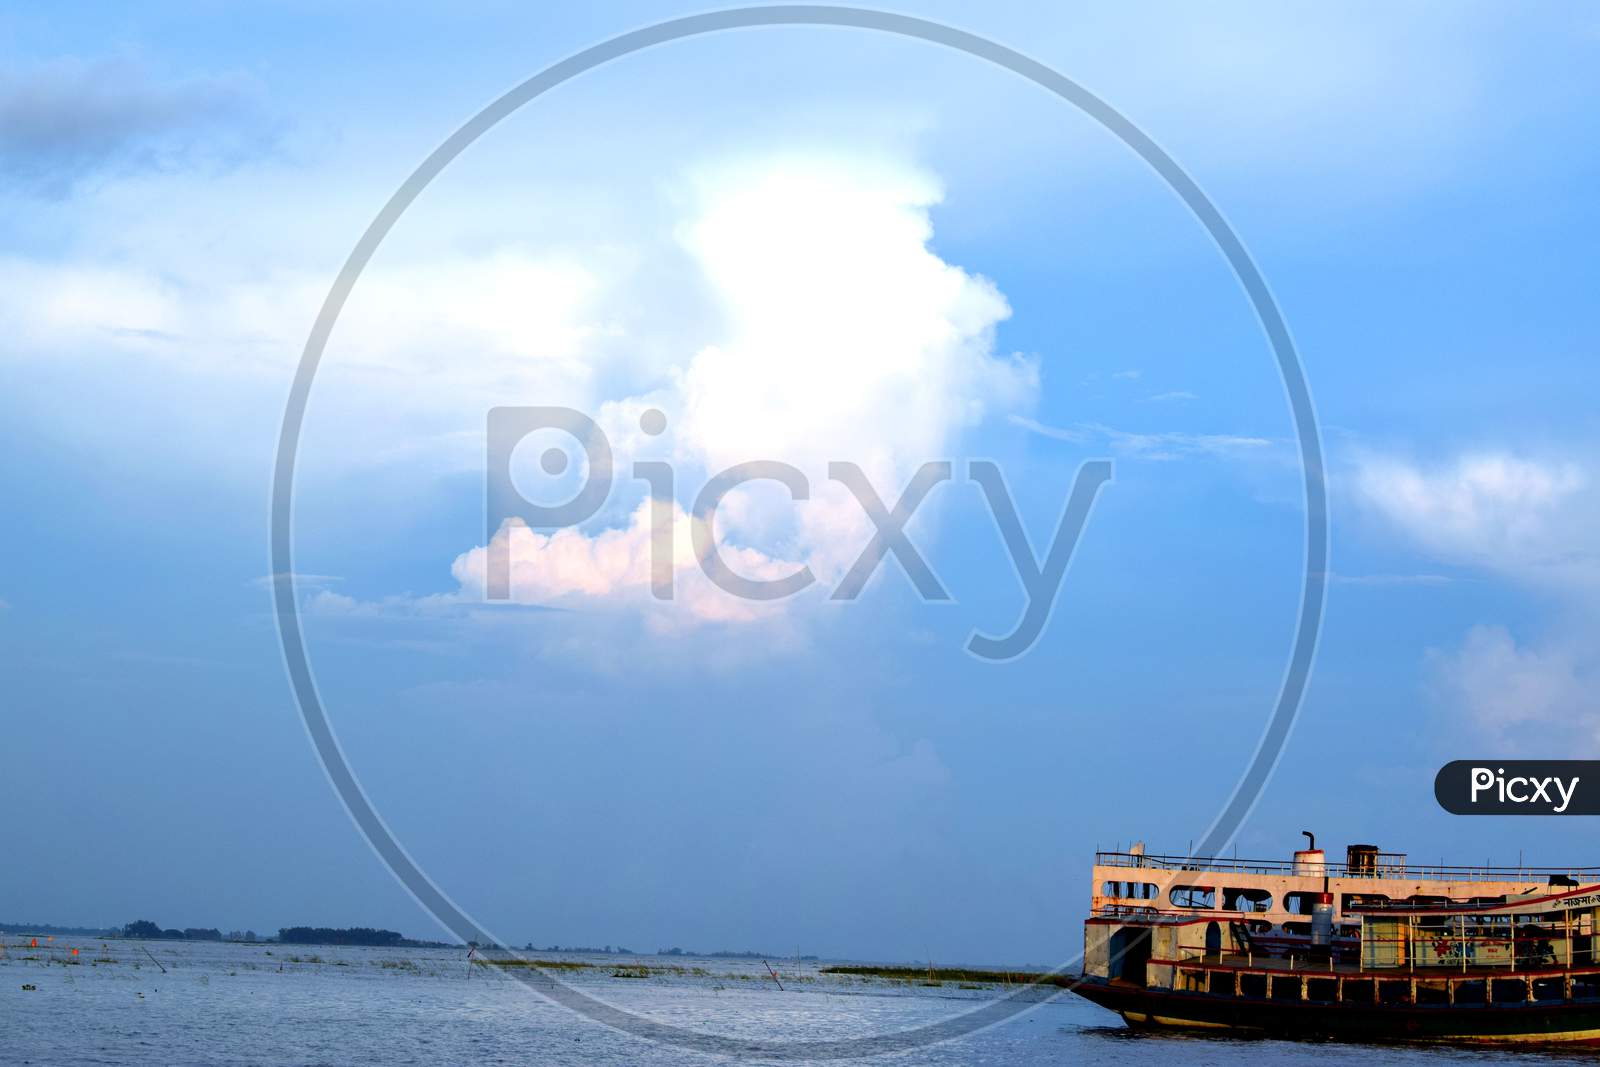 People Transportation In River By Speedboat,Small Boat,The Photo Was Taken From Padma River,Maoa,Dhaka On 18 Th October 2020.